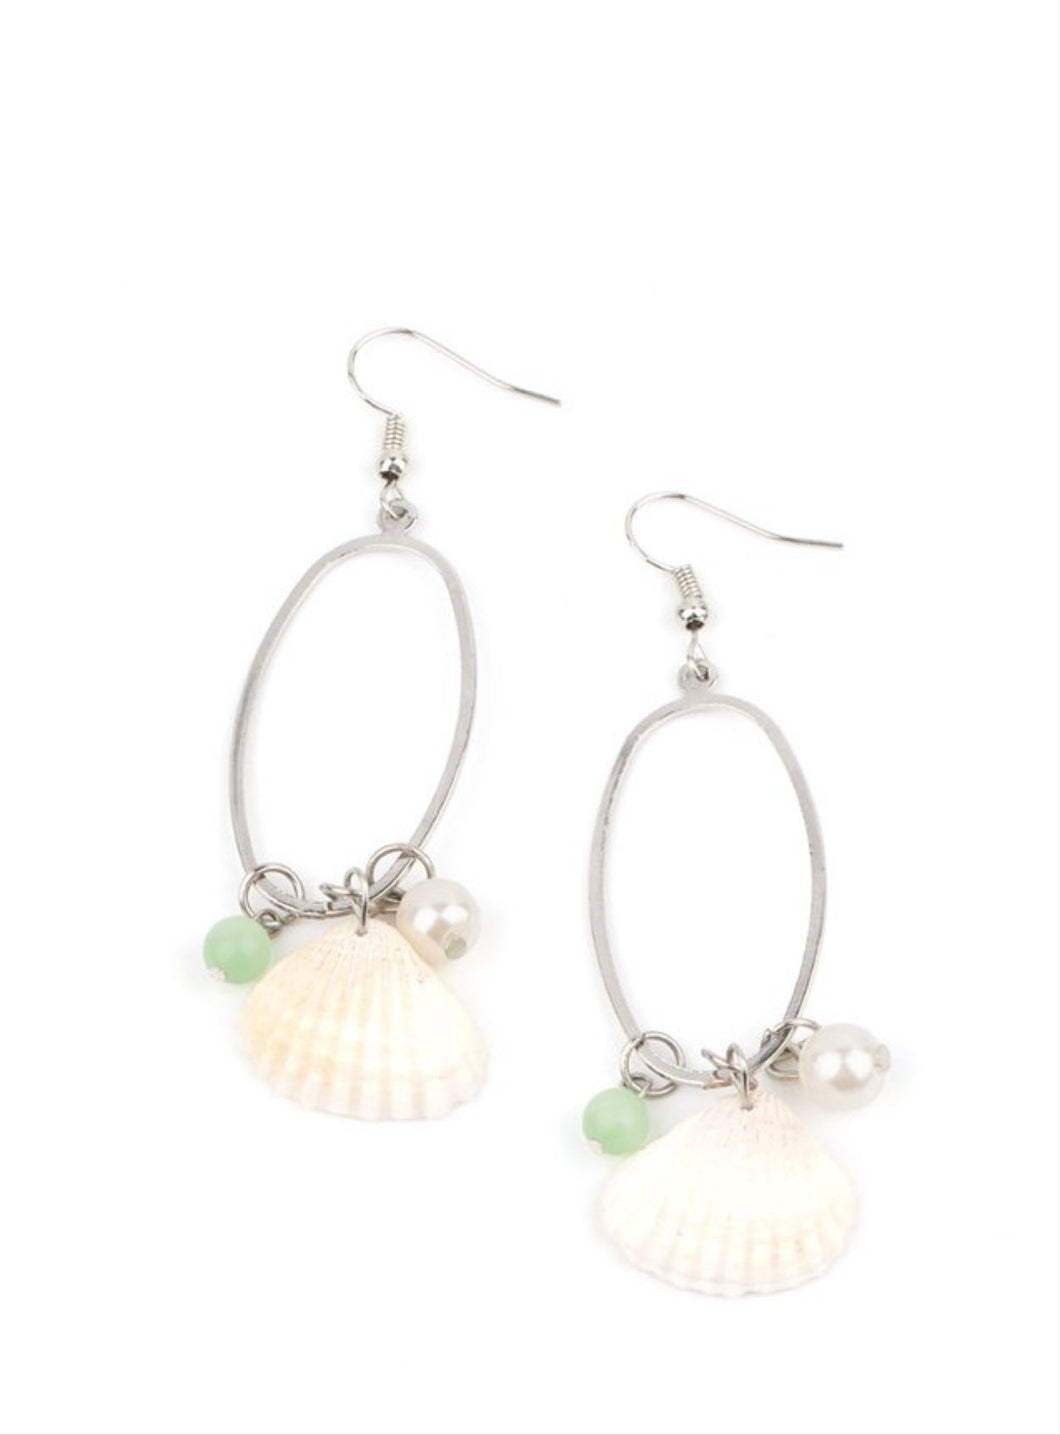 This Too SHELL Pass Green and Shell Earrings